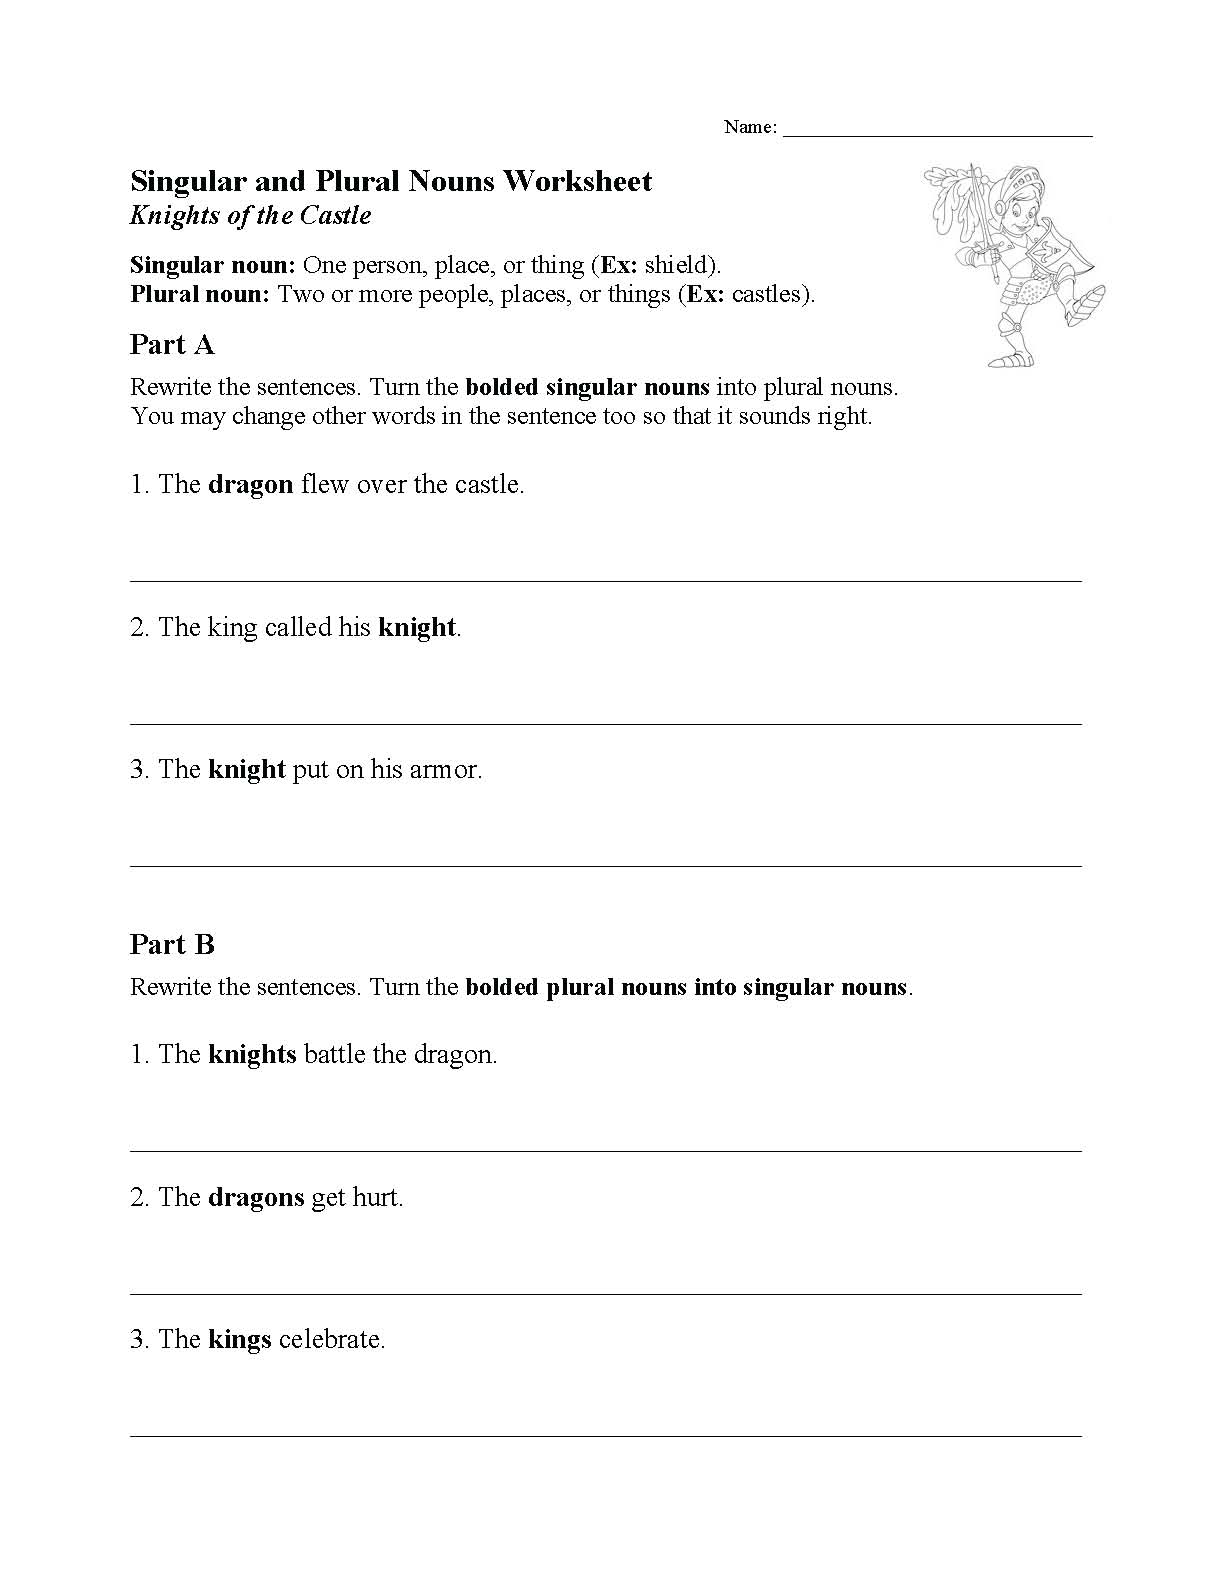 This is a preview image of one of our Language Arts Worksheets. Click on it to view all of our language arts worksheets.